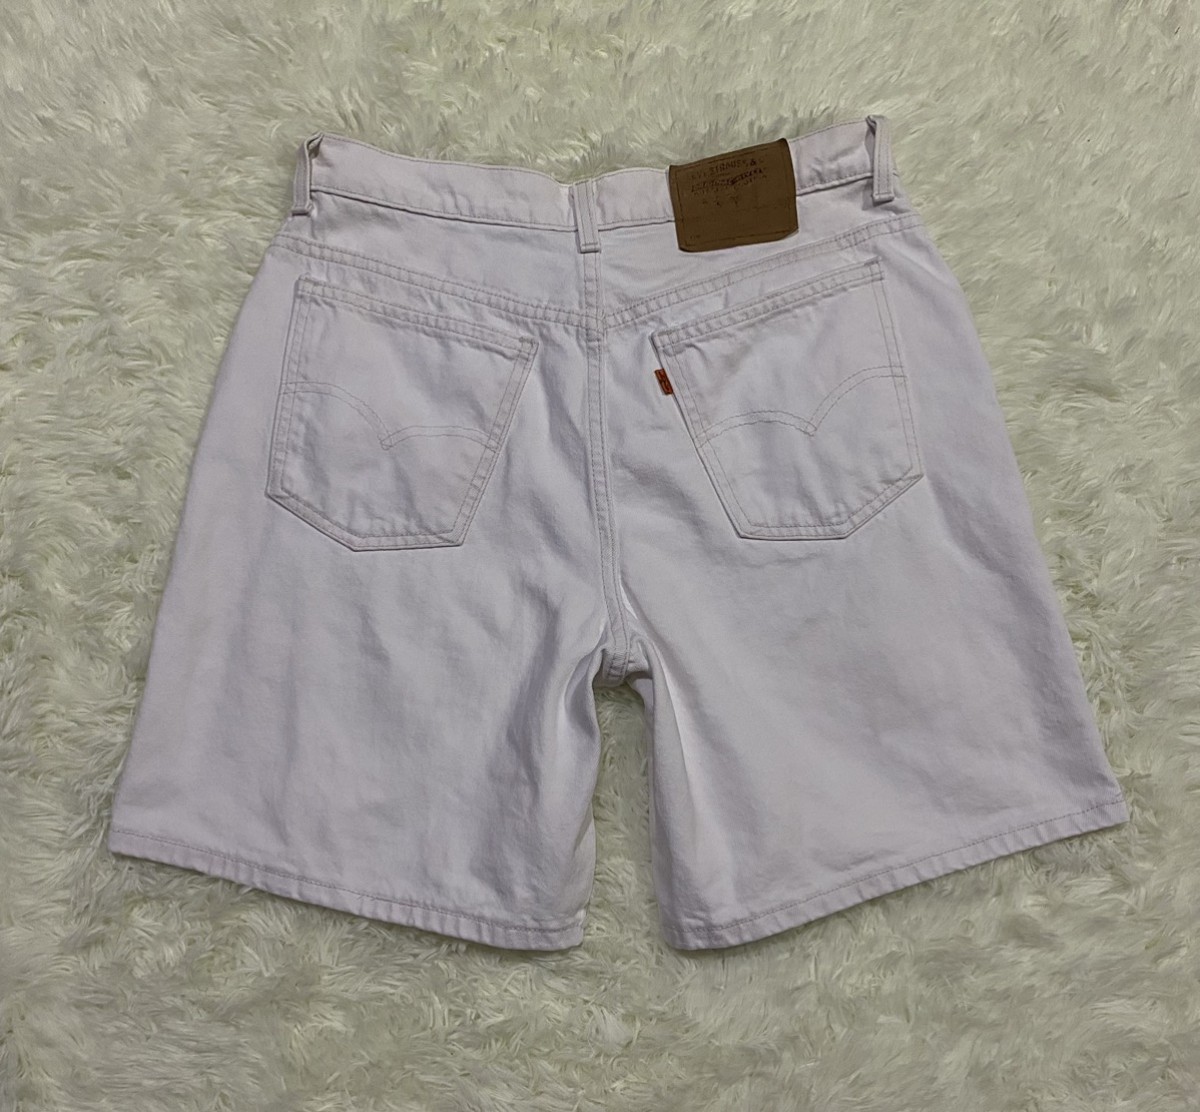 950 Relaxed Fit Orange Tag Short - 11